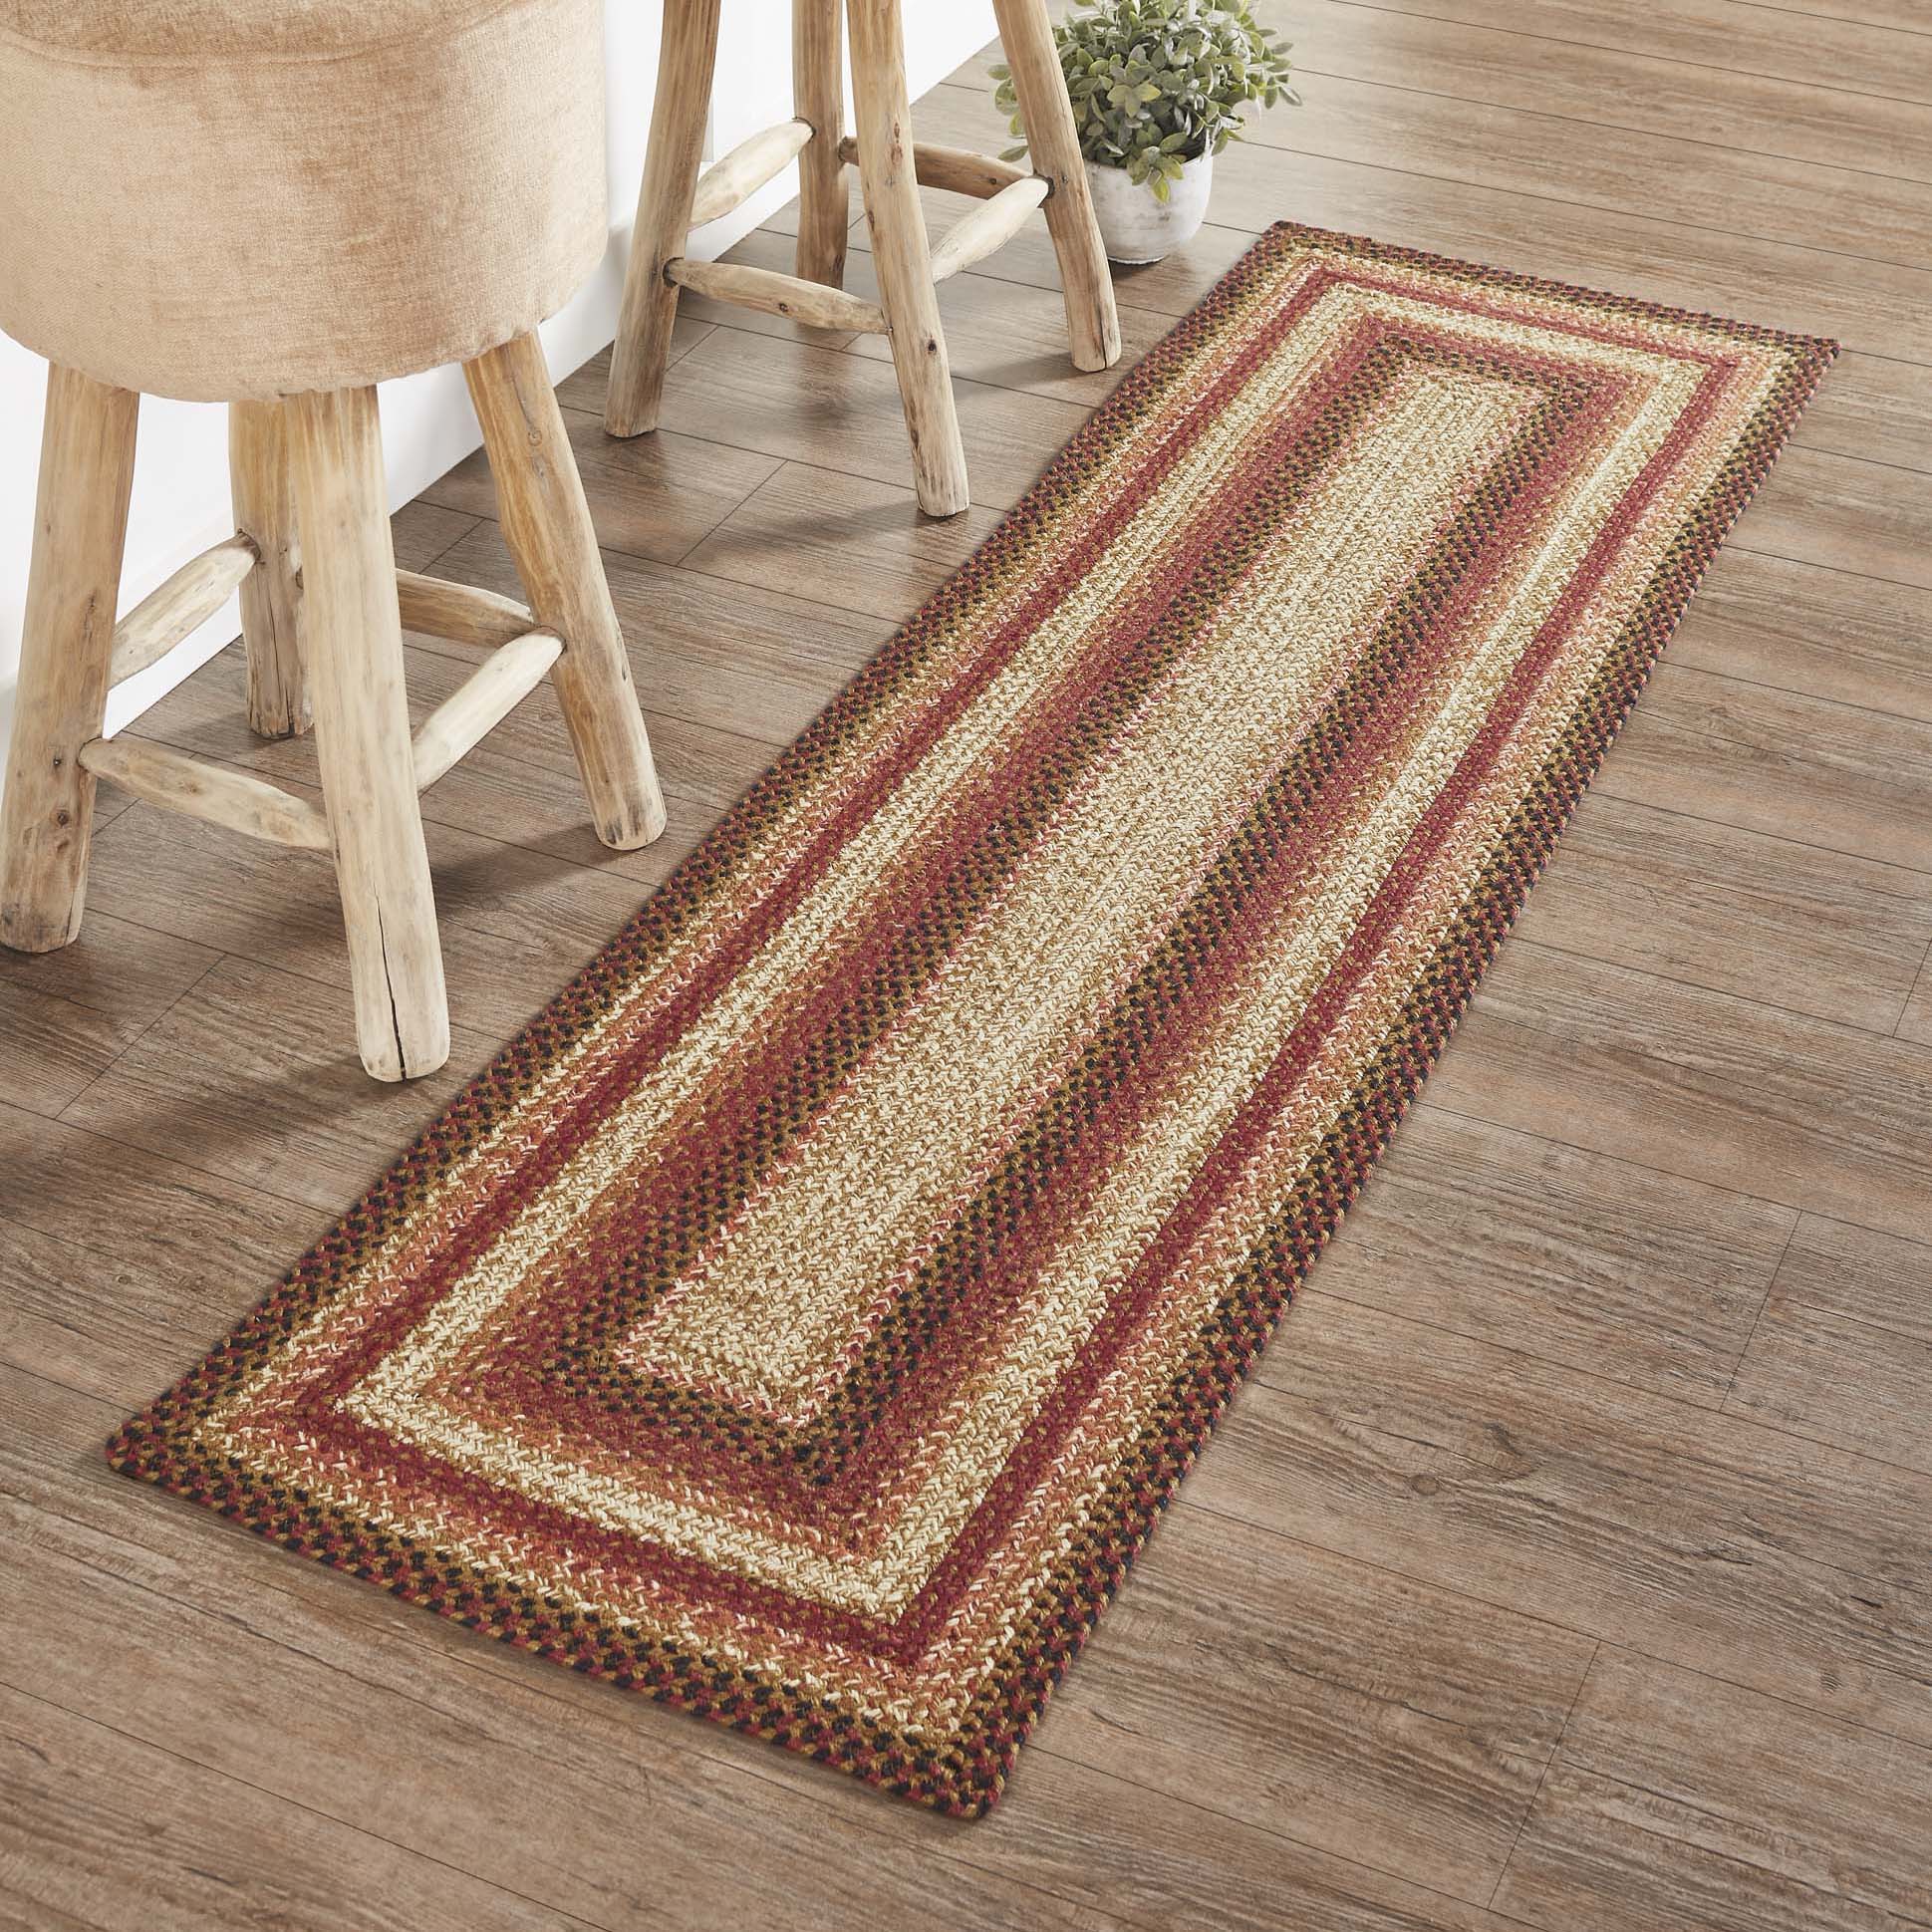 Rustic Farmhouse Braided Jute Rug With Pad